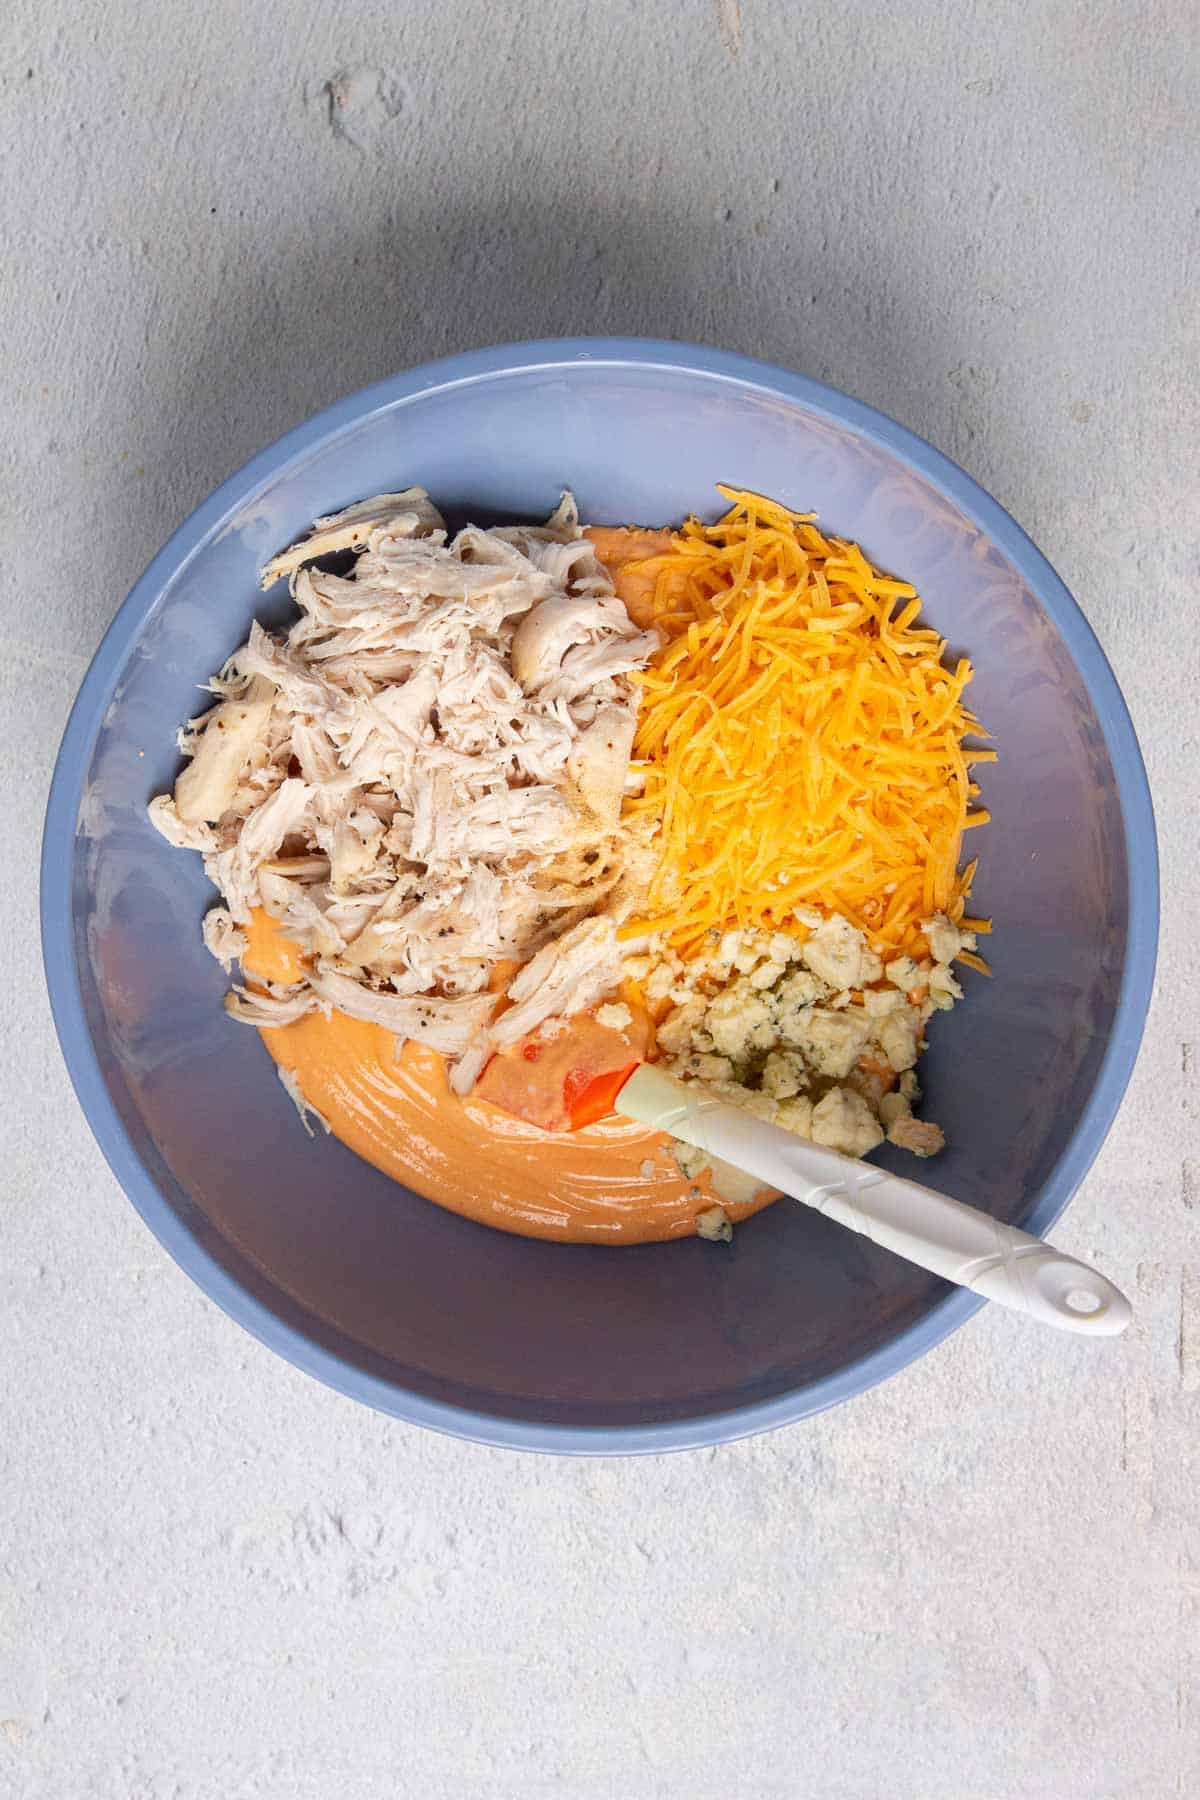 Healthy buffalo chicken dip ingredients in a mixing bowl.